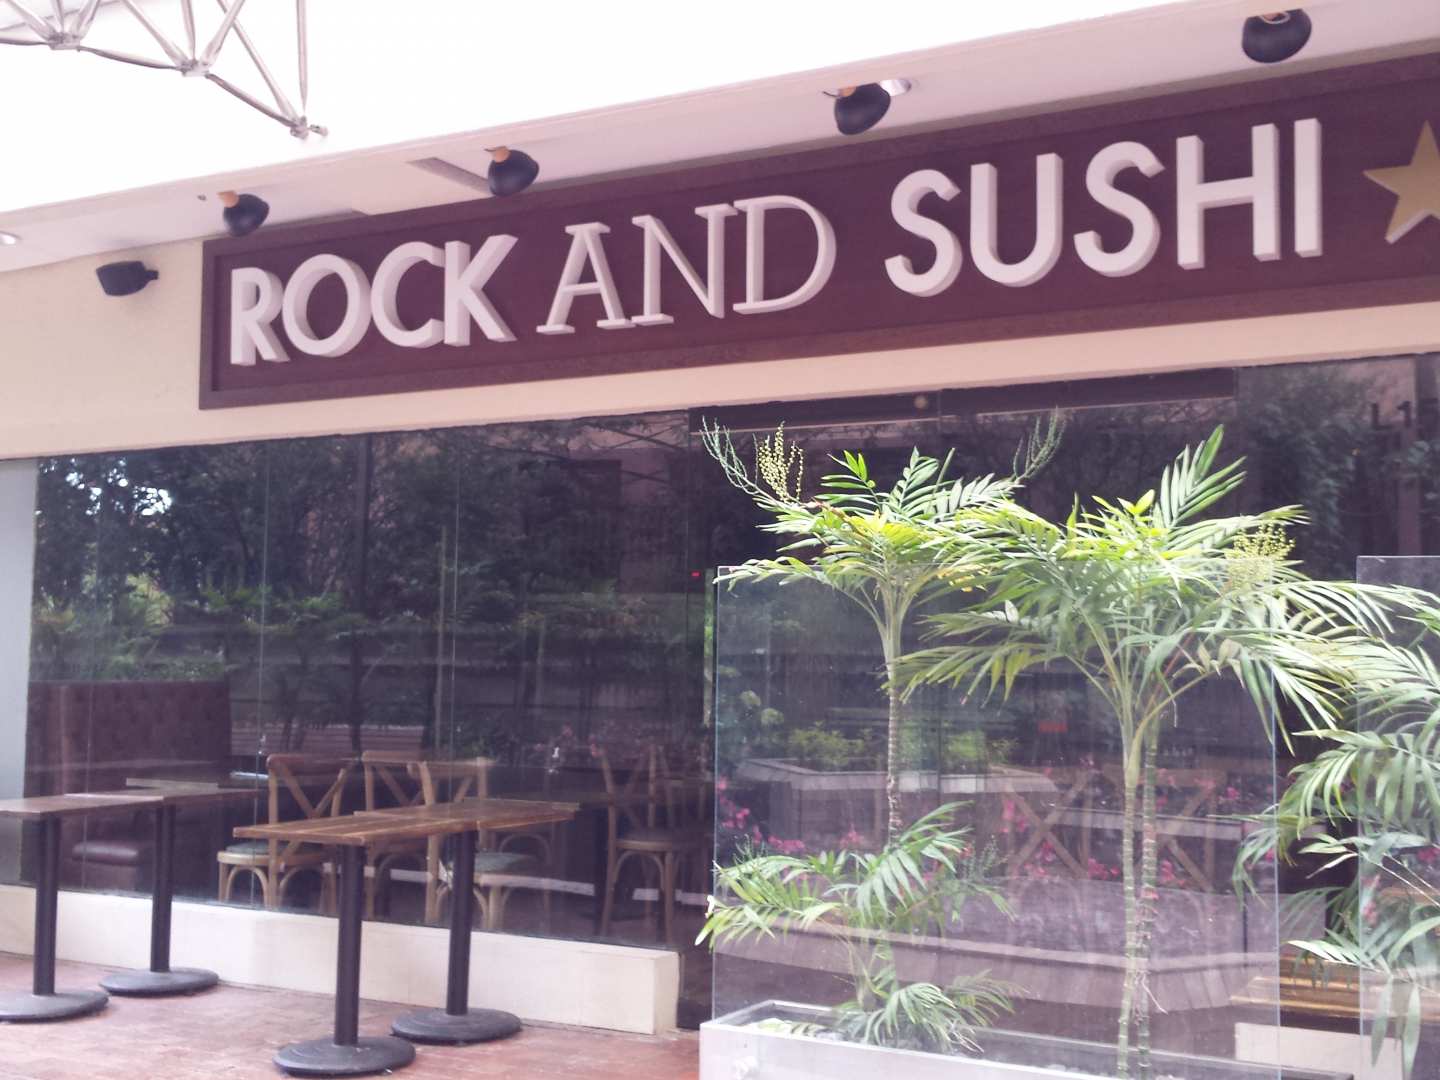 Rock And Sushi